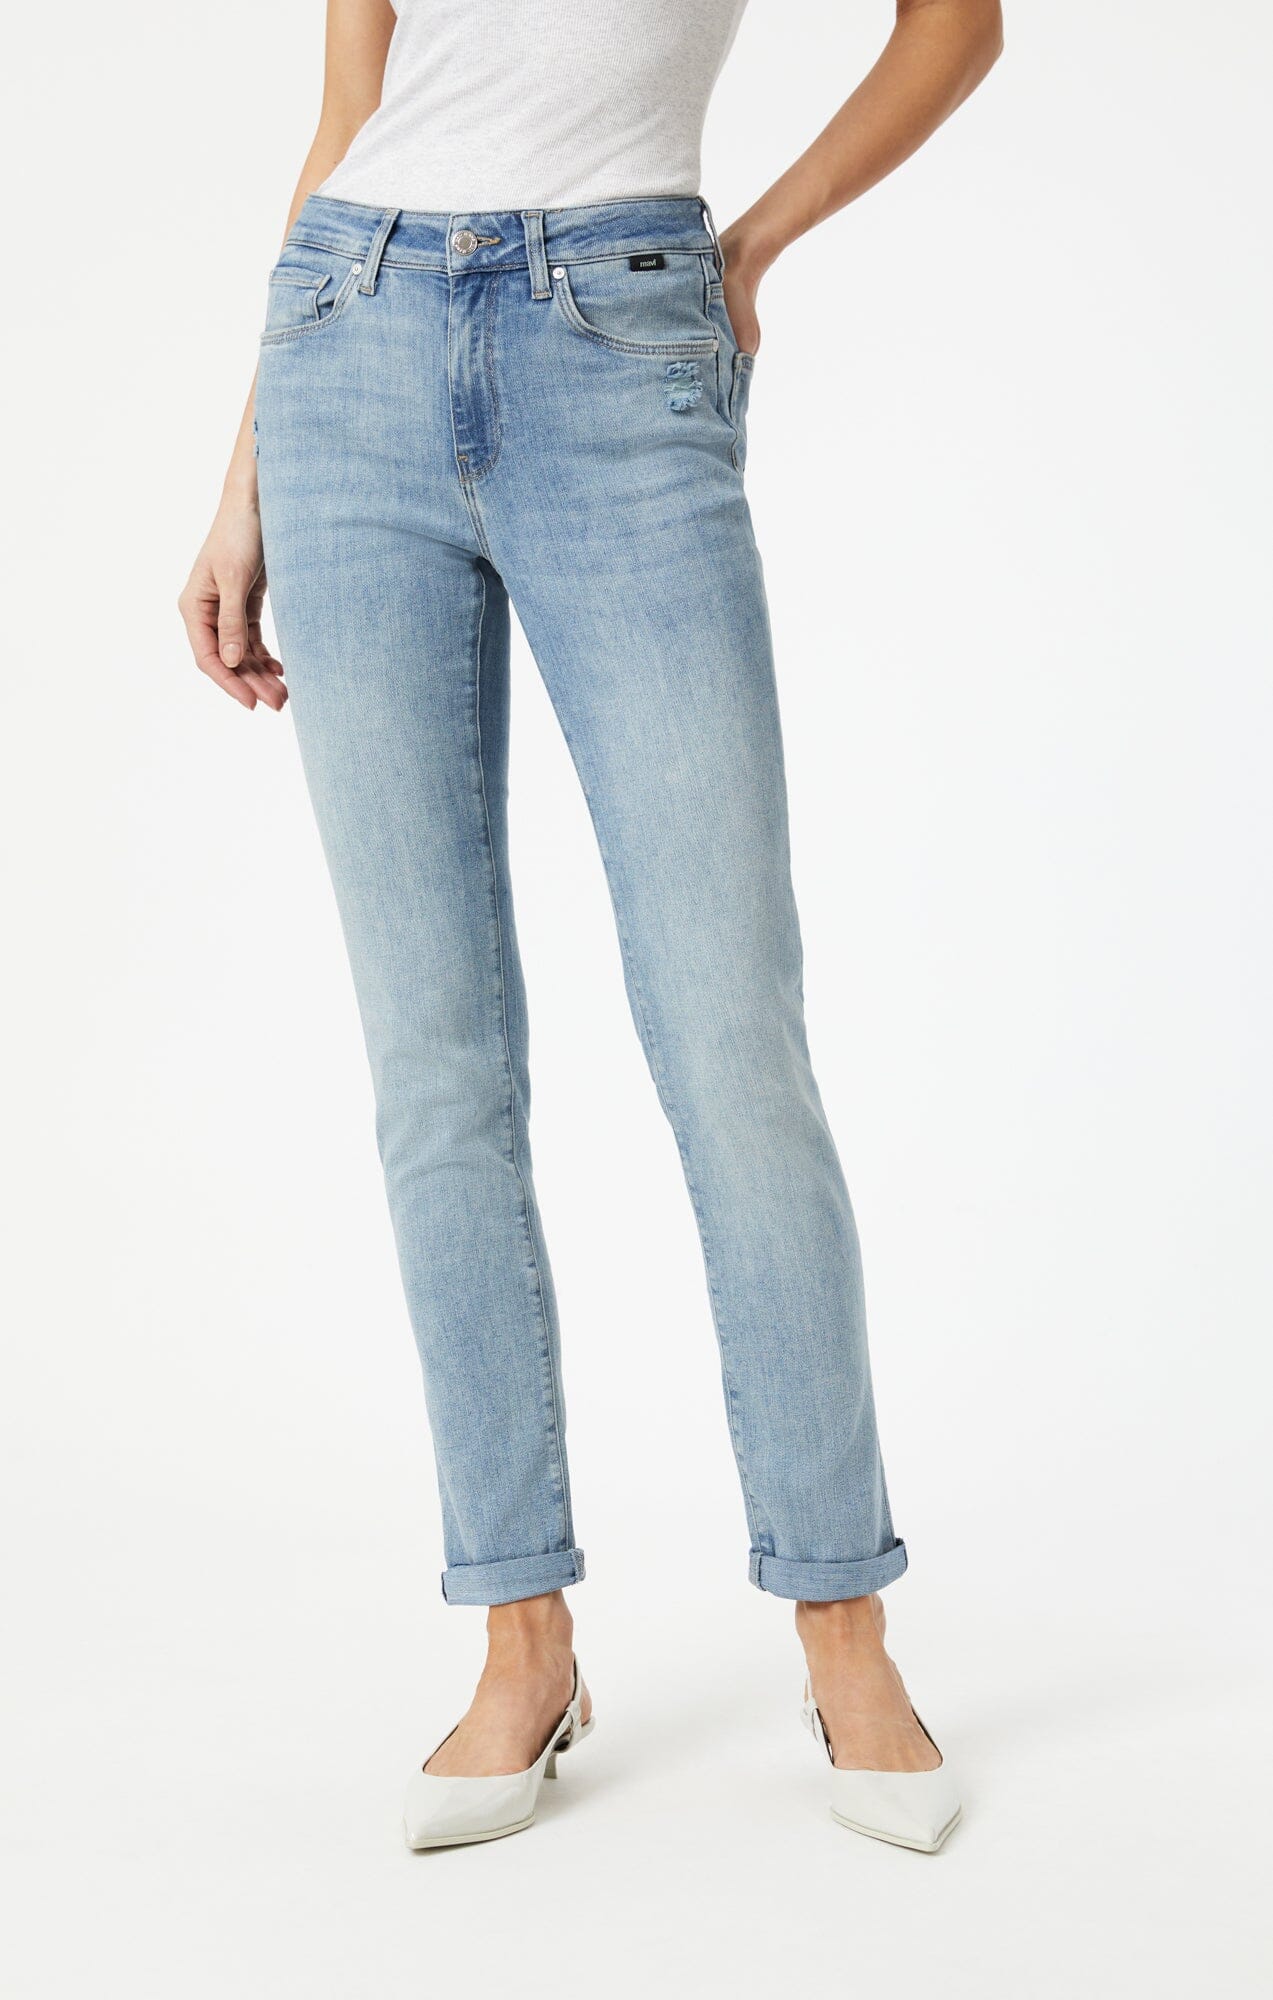 Women's Boyfriend Jeans - High Rise, Relaxed & More